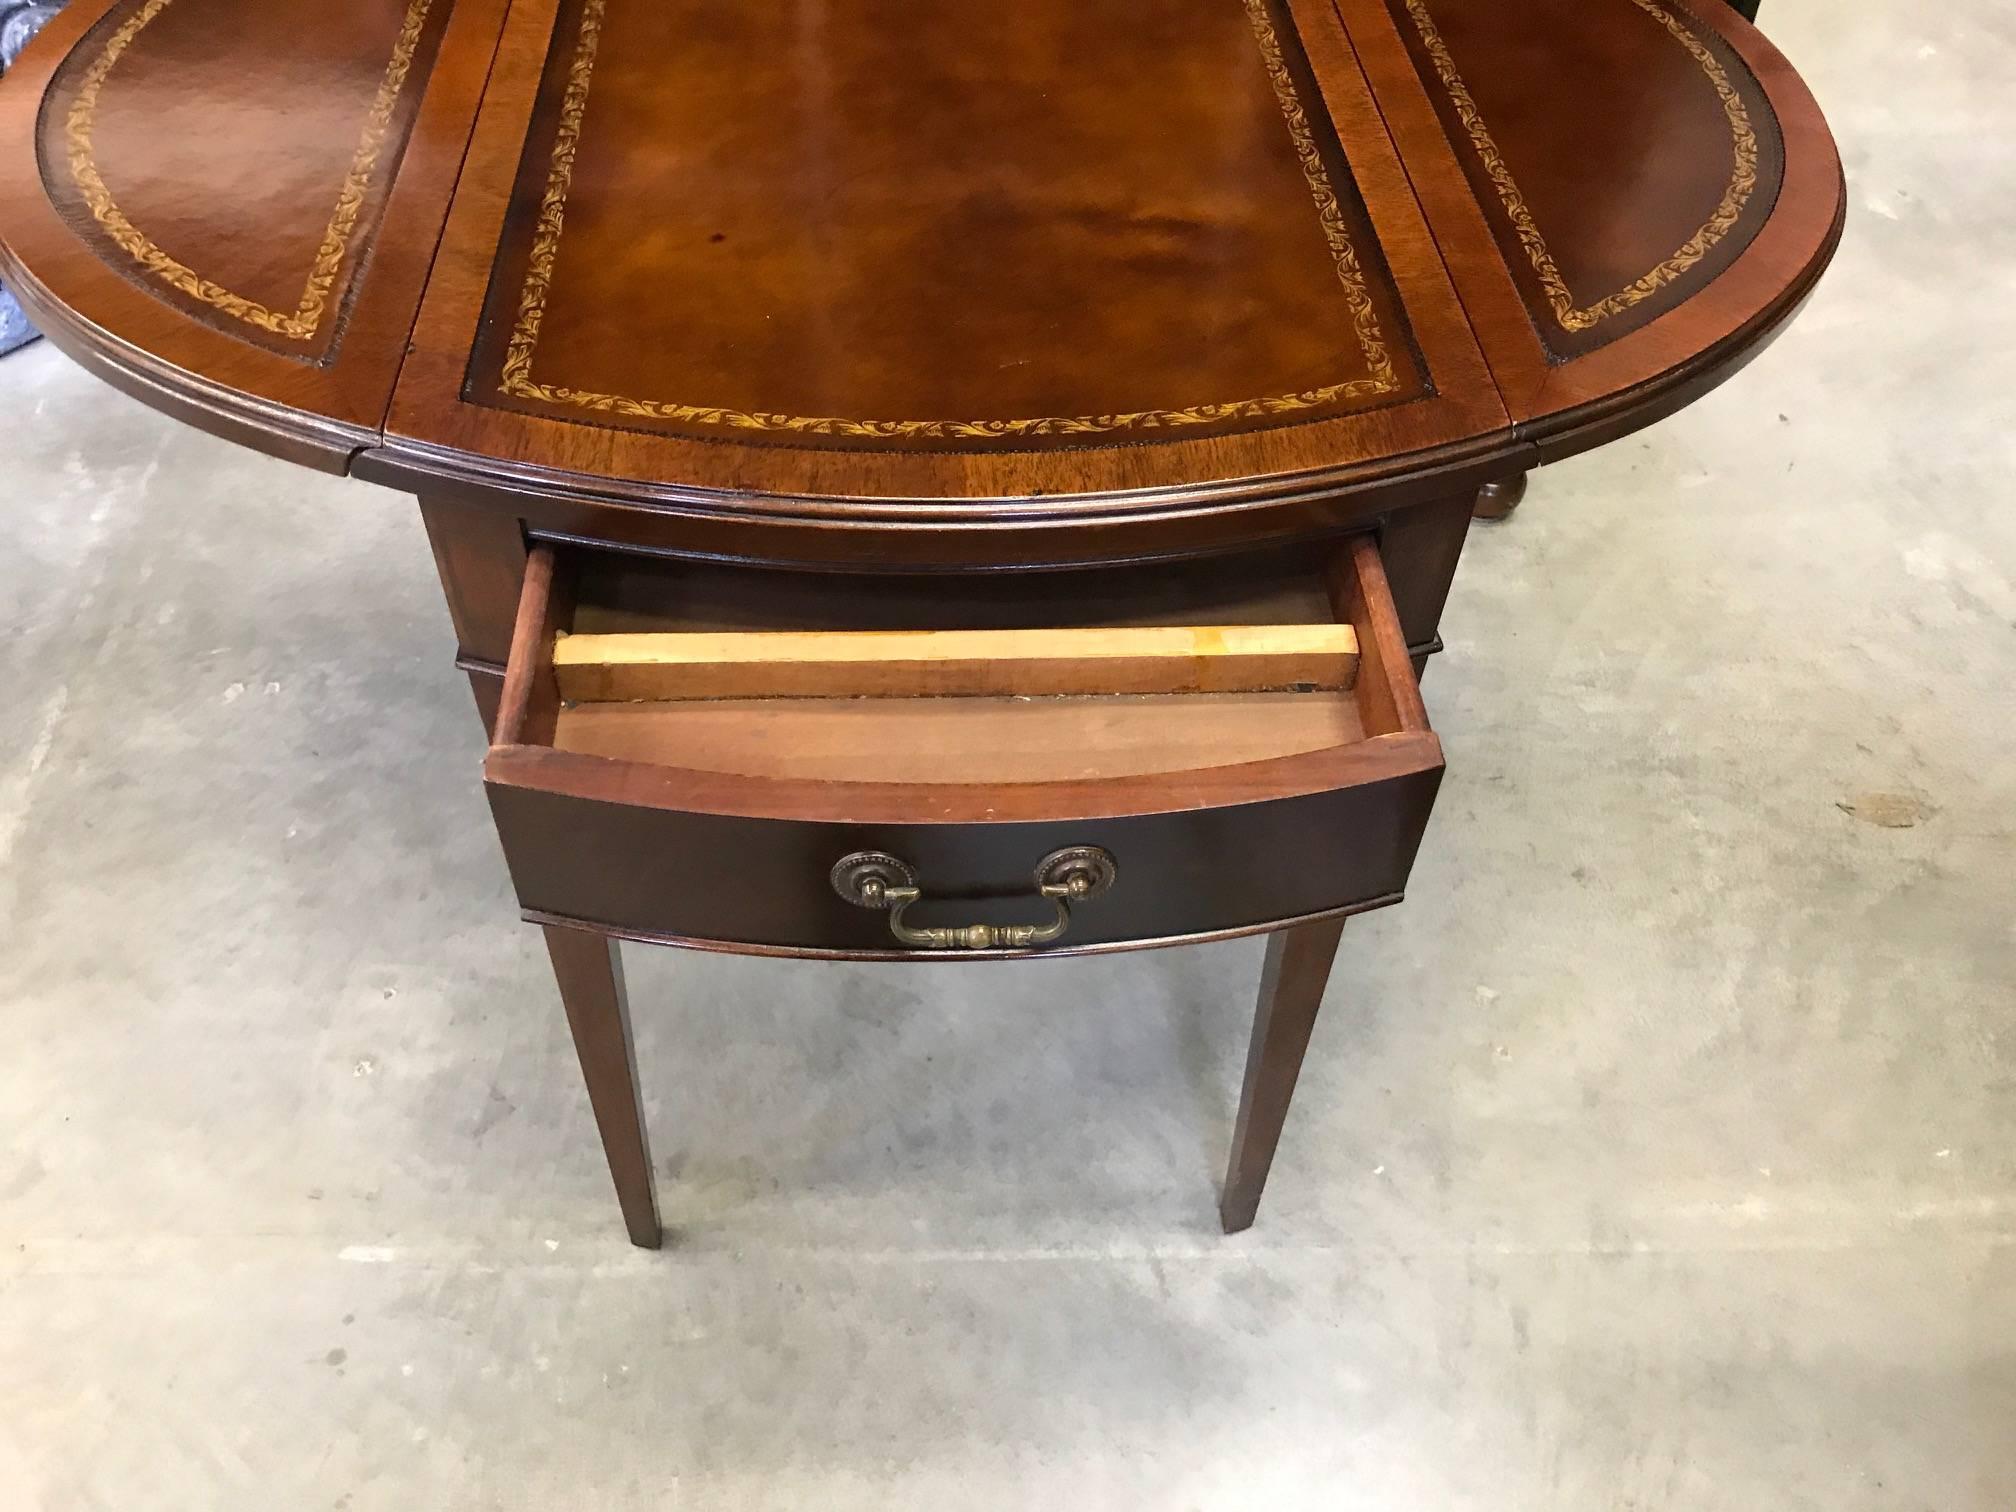 20th Century Pair of Pembroke Leather Topped Mahogany Tables